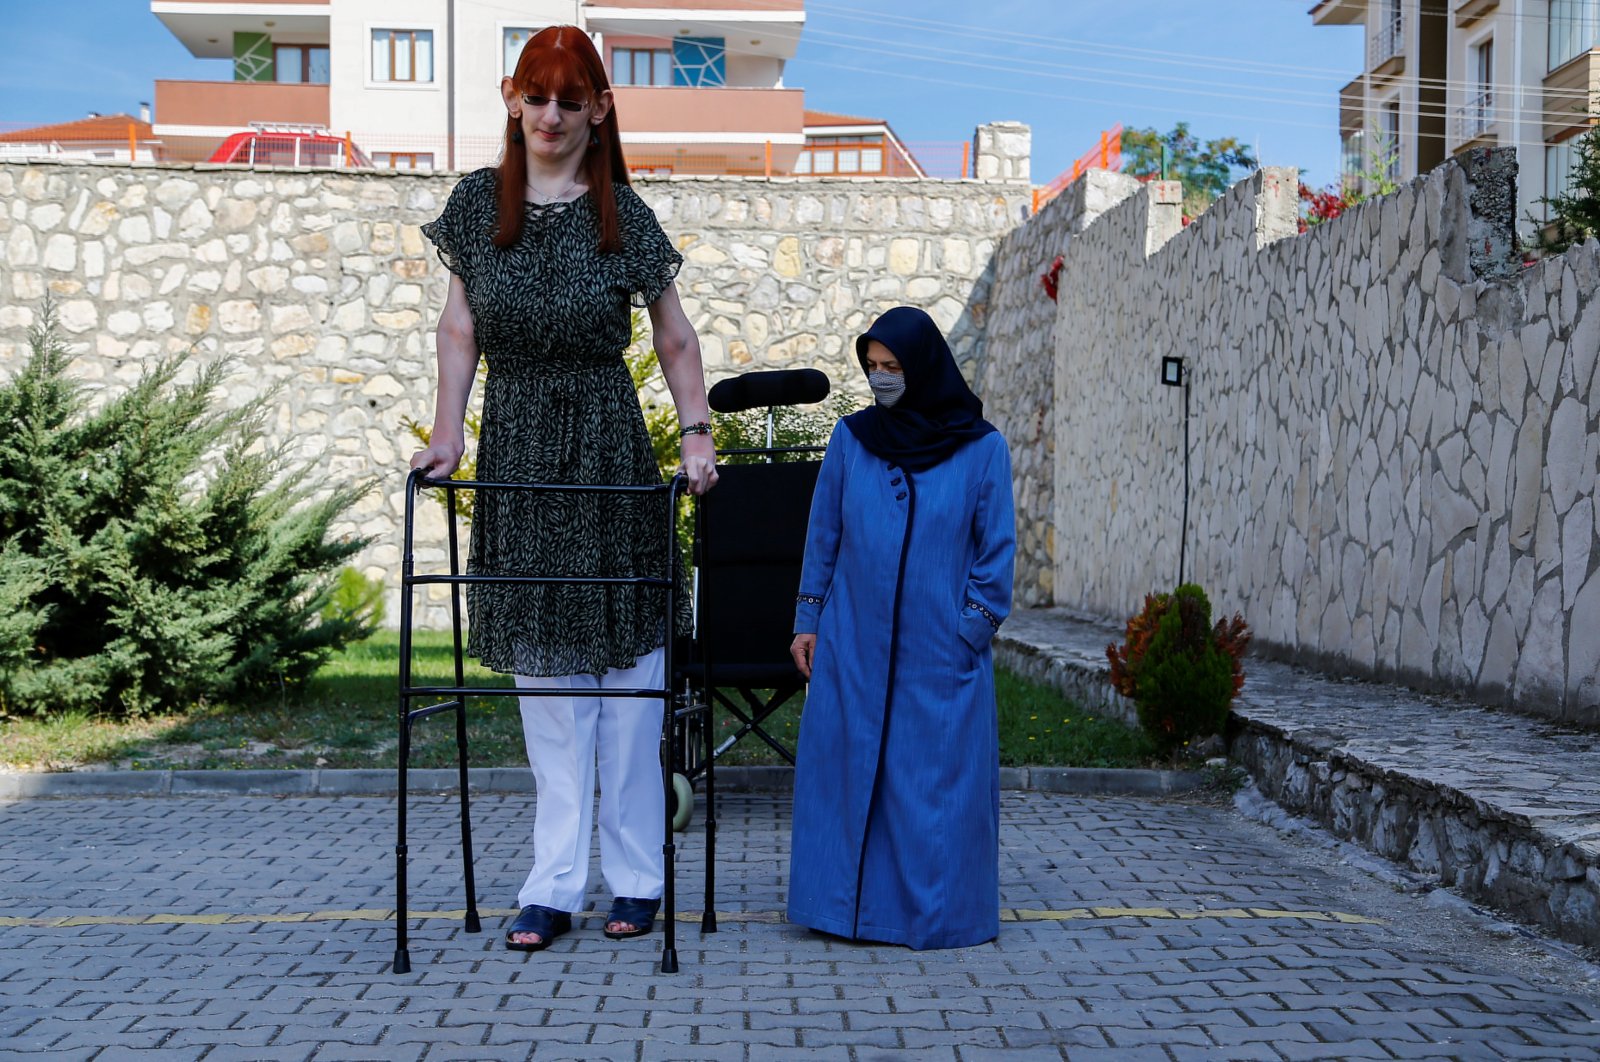 World's tallest woman Rumeysa Gelgi poses with her mother Safiye Gelgi during a news conference outside their home in Safranbolu, Karabük province, Turkey, Oct. 14, 2021. (Reuters Photo)